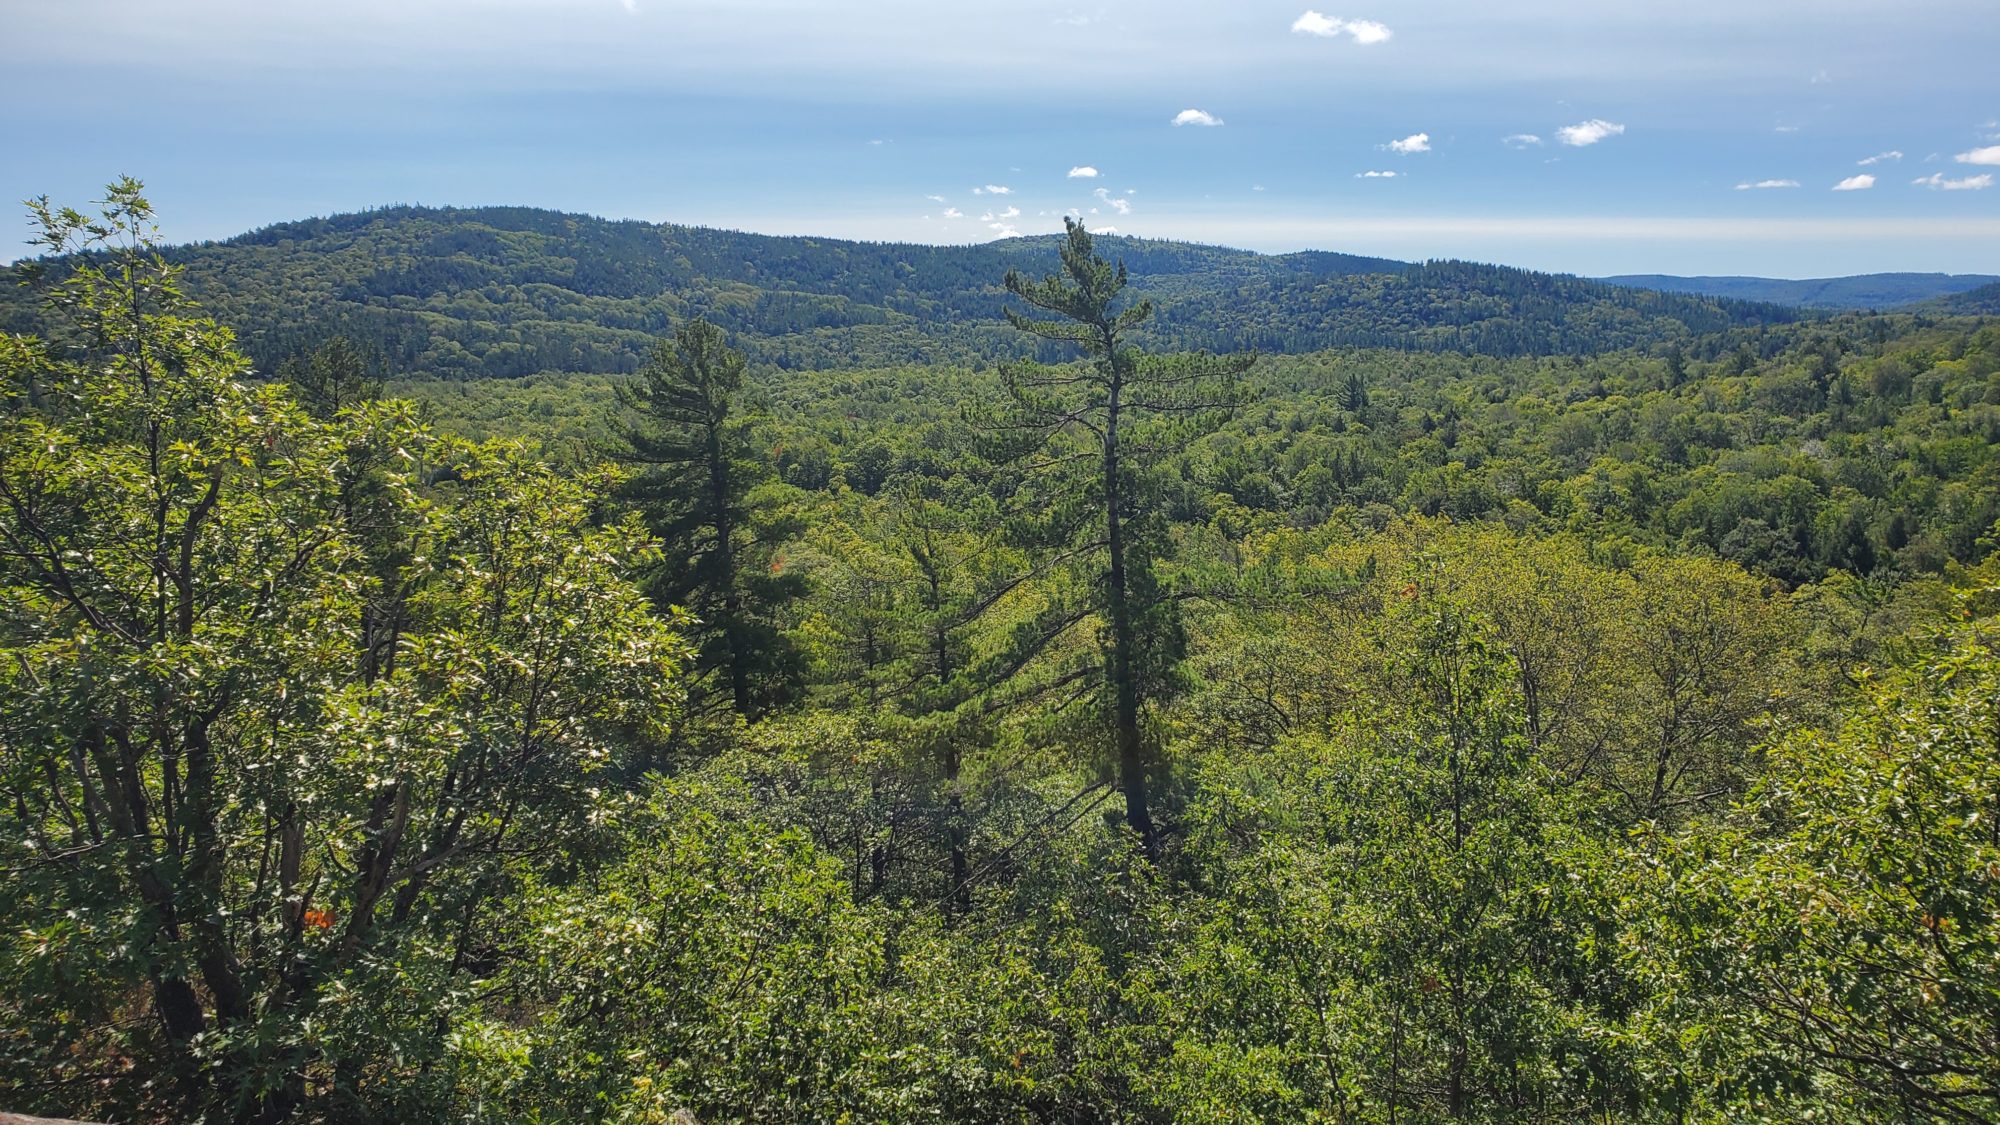 View of Huron Mountains from Powell Peak Trail